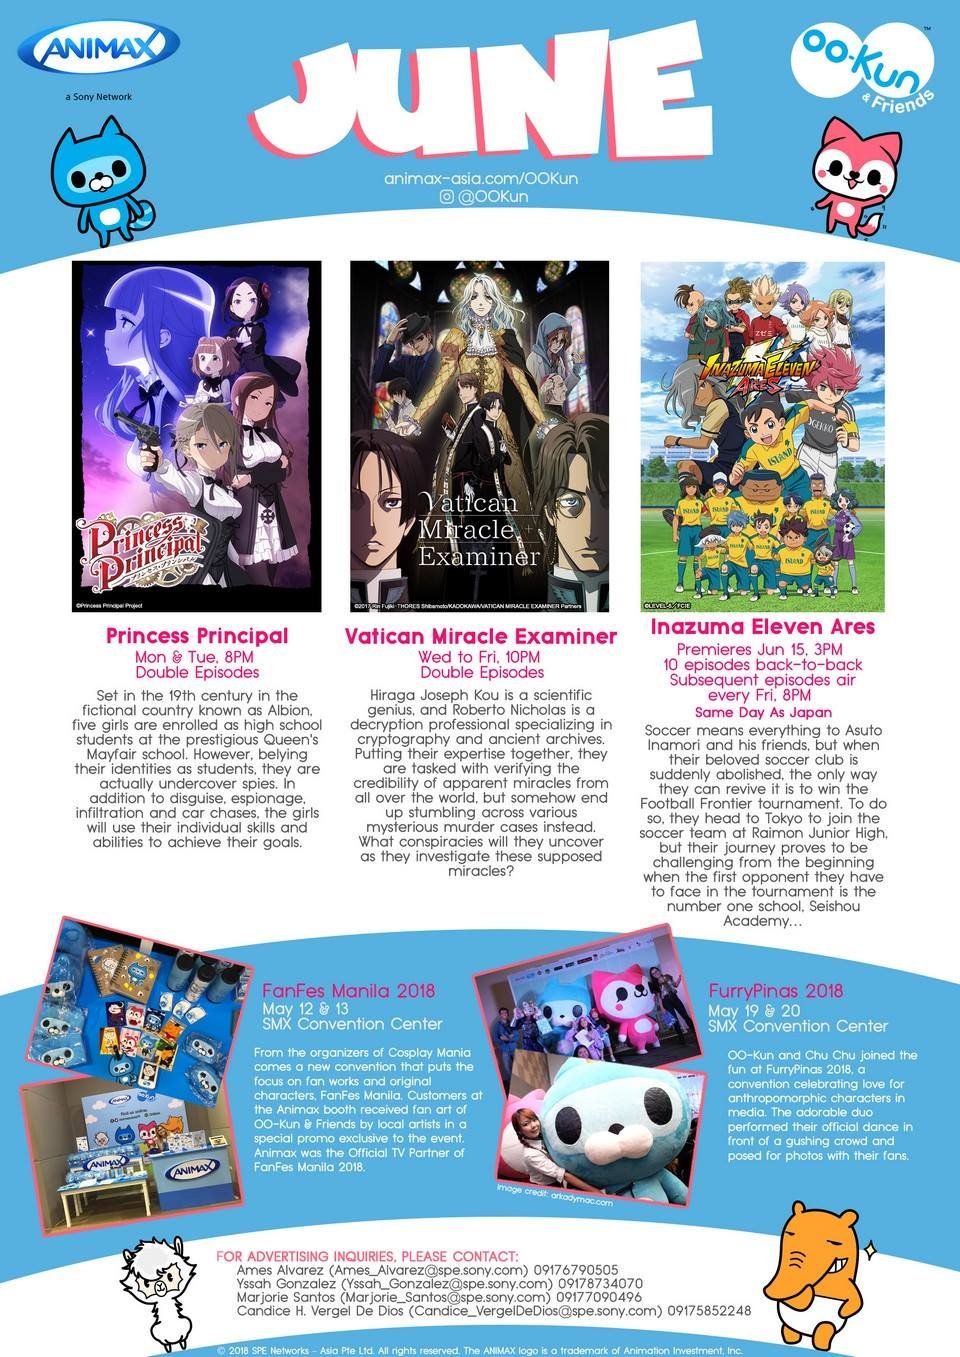 Princess Principal Vatican Miracle Examiner And Inazuma Eleven Ares On Animax This June The Cosplay And Anime Cafe Arkadymac Com